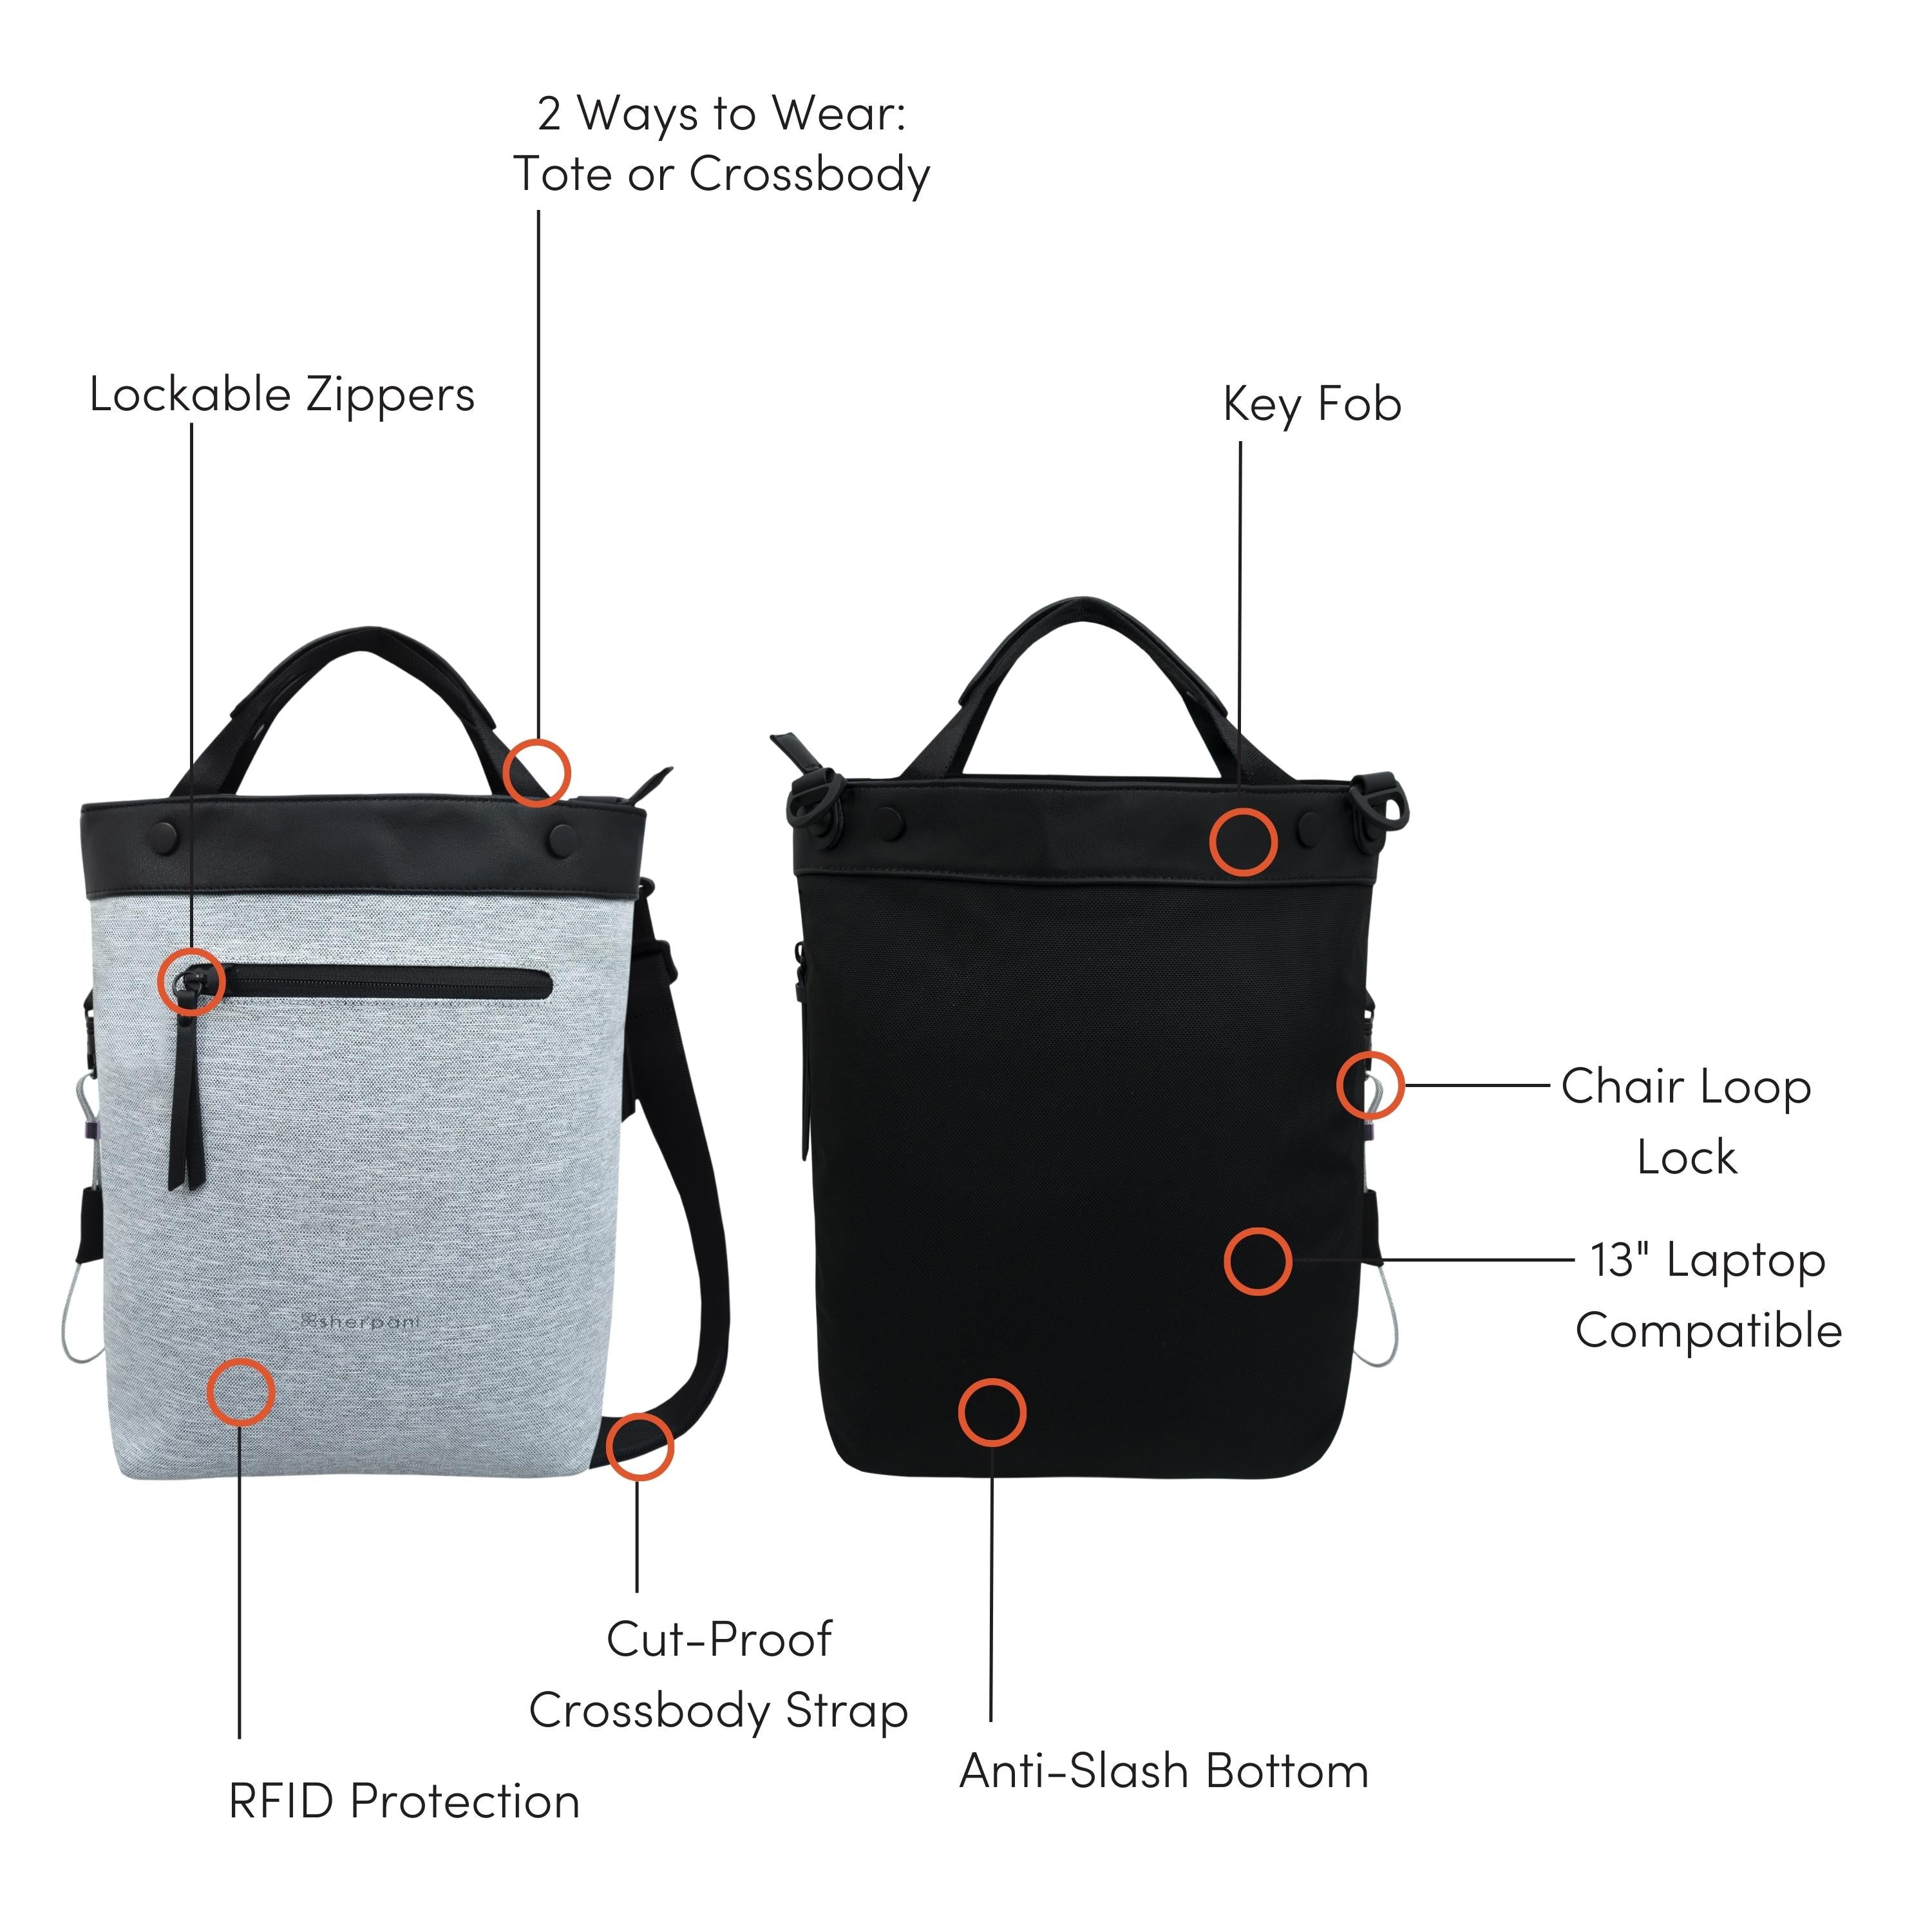 Graphic showcasing the features of Sherpani’s Anti Theft bag, the Soleil AT in Sterling. There is a front and a back view of the bag, red circles highlight the following features: Lockable Zippers, 2 Ways to Wear: Tote or Crossbody, Key Fob, Chair Loop Lock, 13” Laptop Compatible, Anti-Slash Bottom, Cut-Proof Crossbody Strap, RFID Protection. 